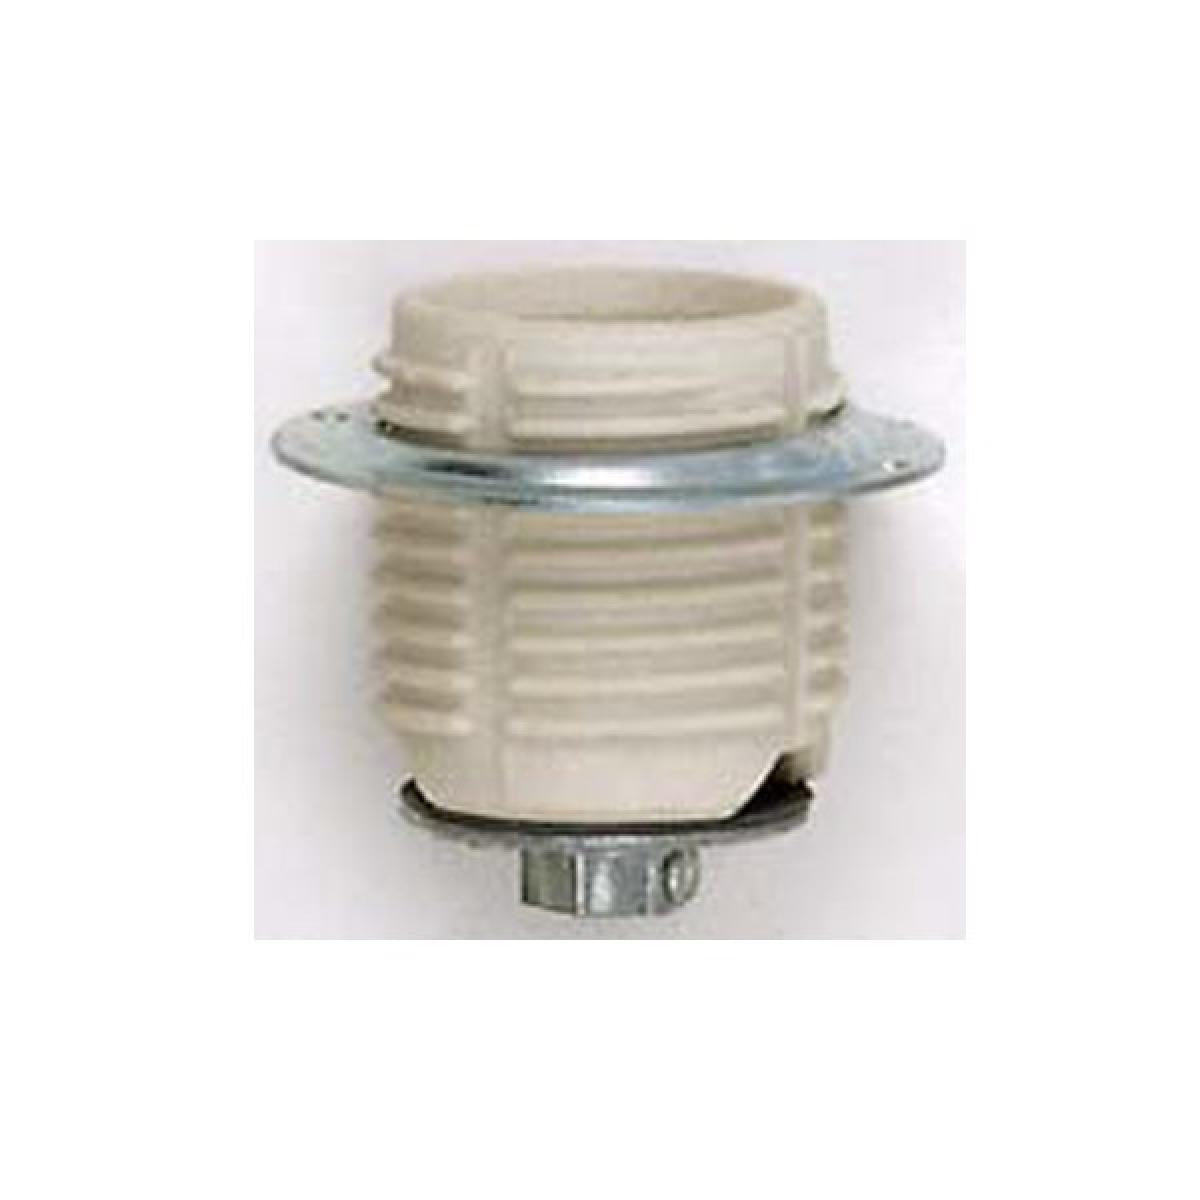 Satco 80-1647 Keyless Threaded Porcelain Socket With 1/8 IP Cap, Ring, And Spring Contact For 4KV Unglazed 660W 600V